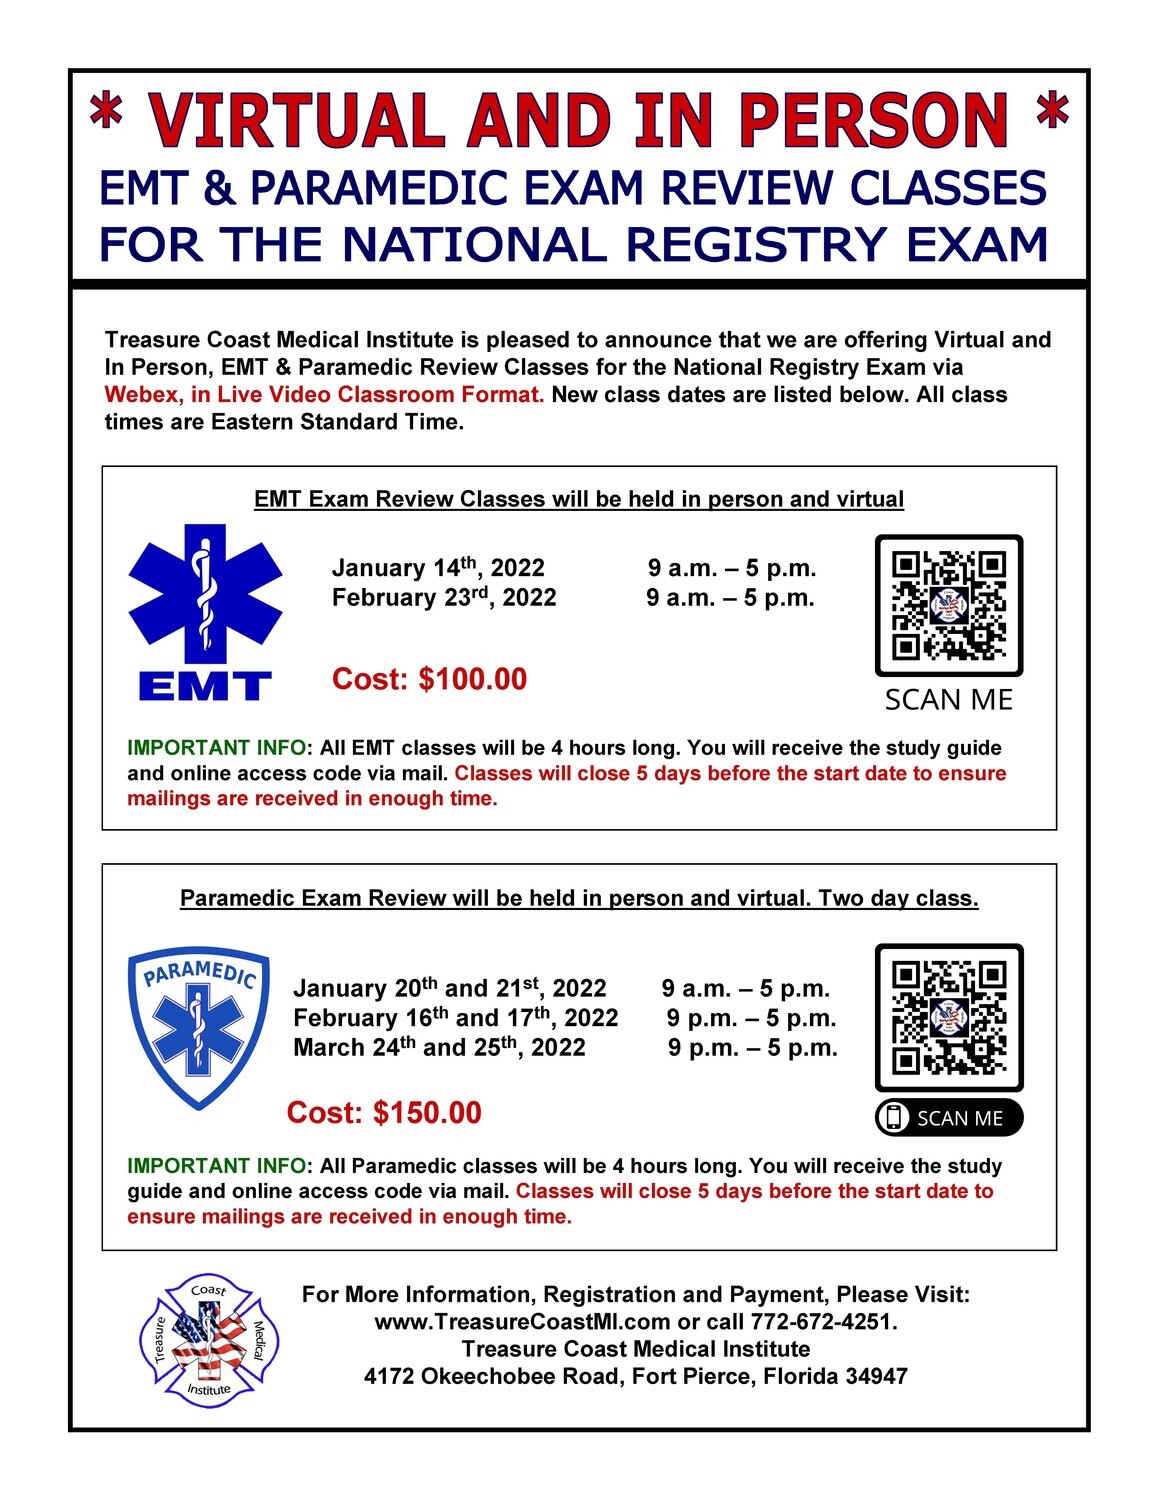 National Registry Paramedic March 24th and 25th
Fort Pierce TCMI (VIRTUAL VIA WEBEX 9-5pm)